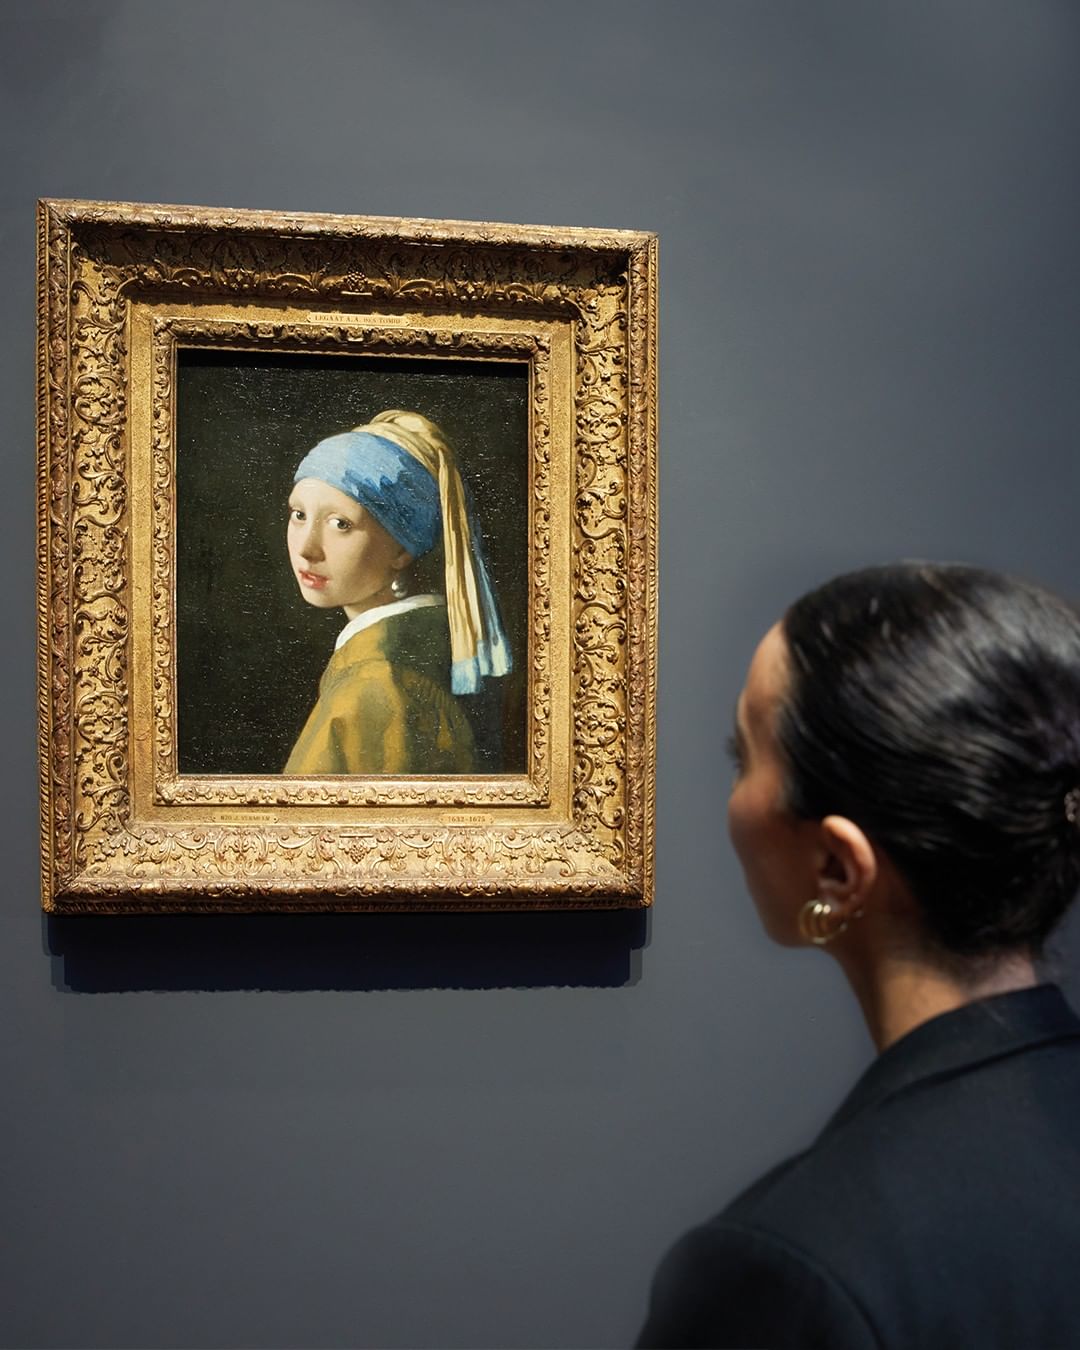 Vermeer's "Girl with a Pearl Earring" is one of the many masterpieces held inside the museum